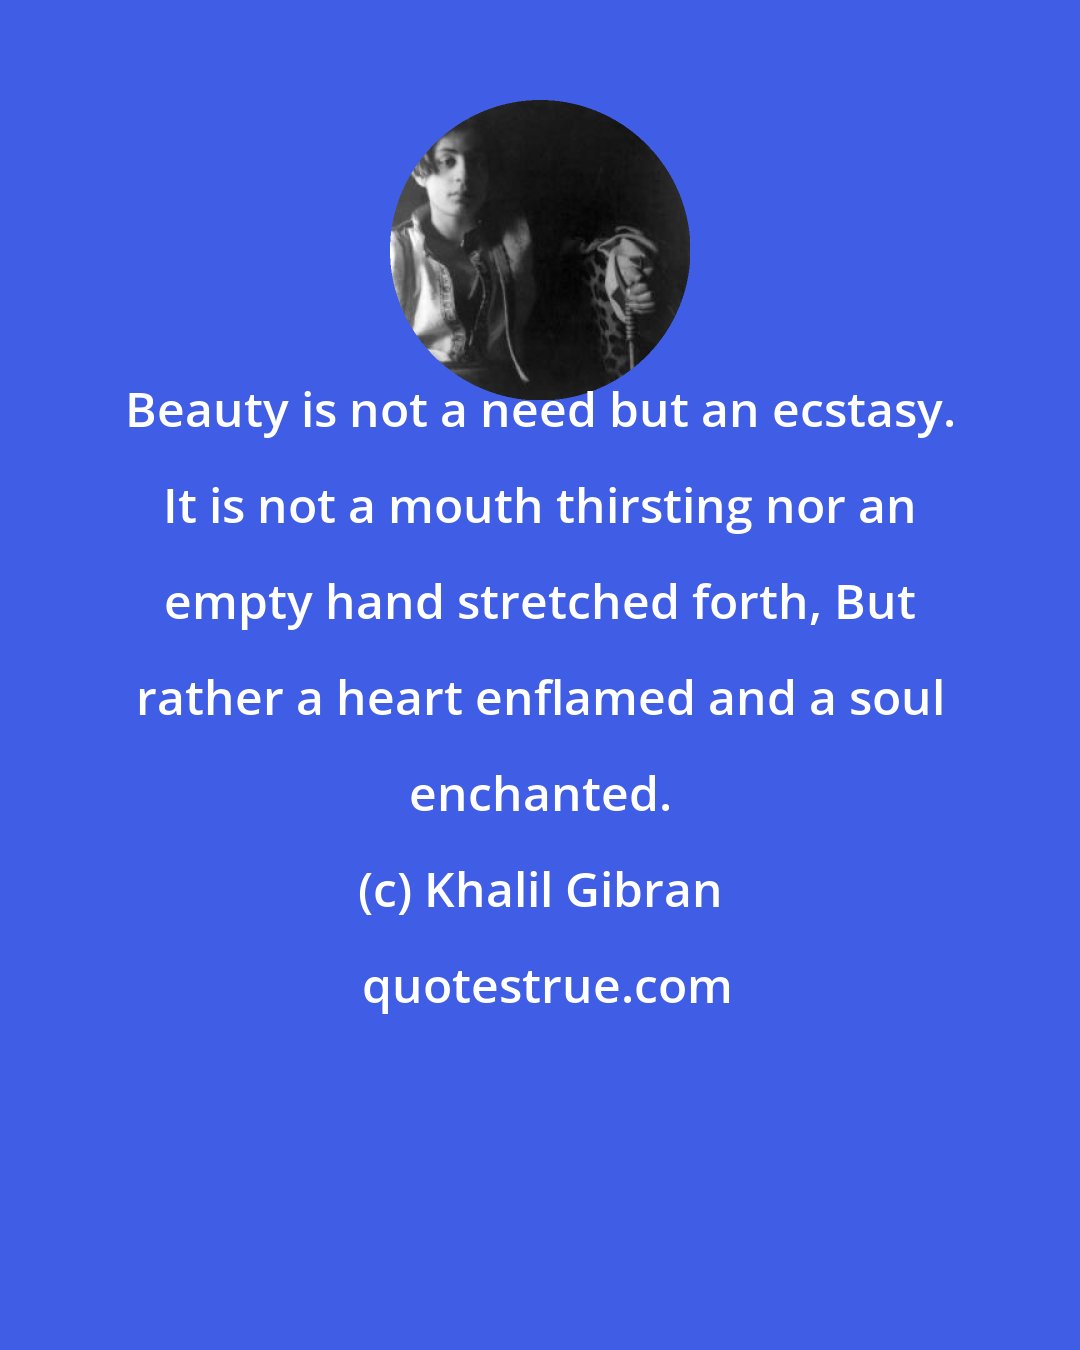 Khalil Gibran: Beauty is not a need but an ecstasy. It is not a mouth thirsting nor an empty hand stretched forth, But rather a heart enflamed and a soul enchanted.